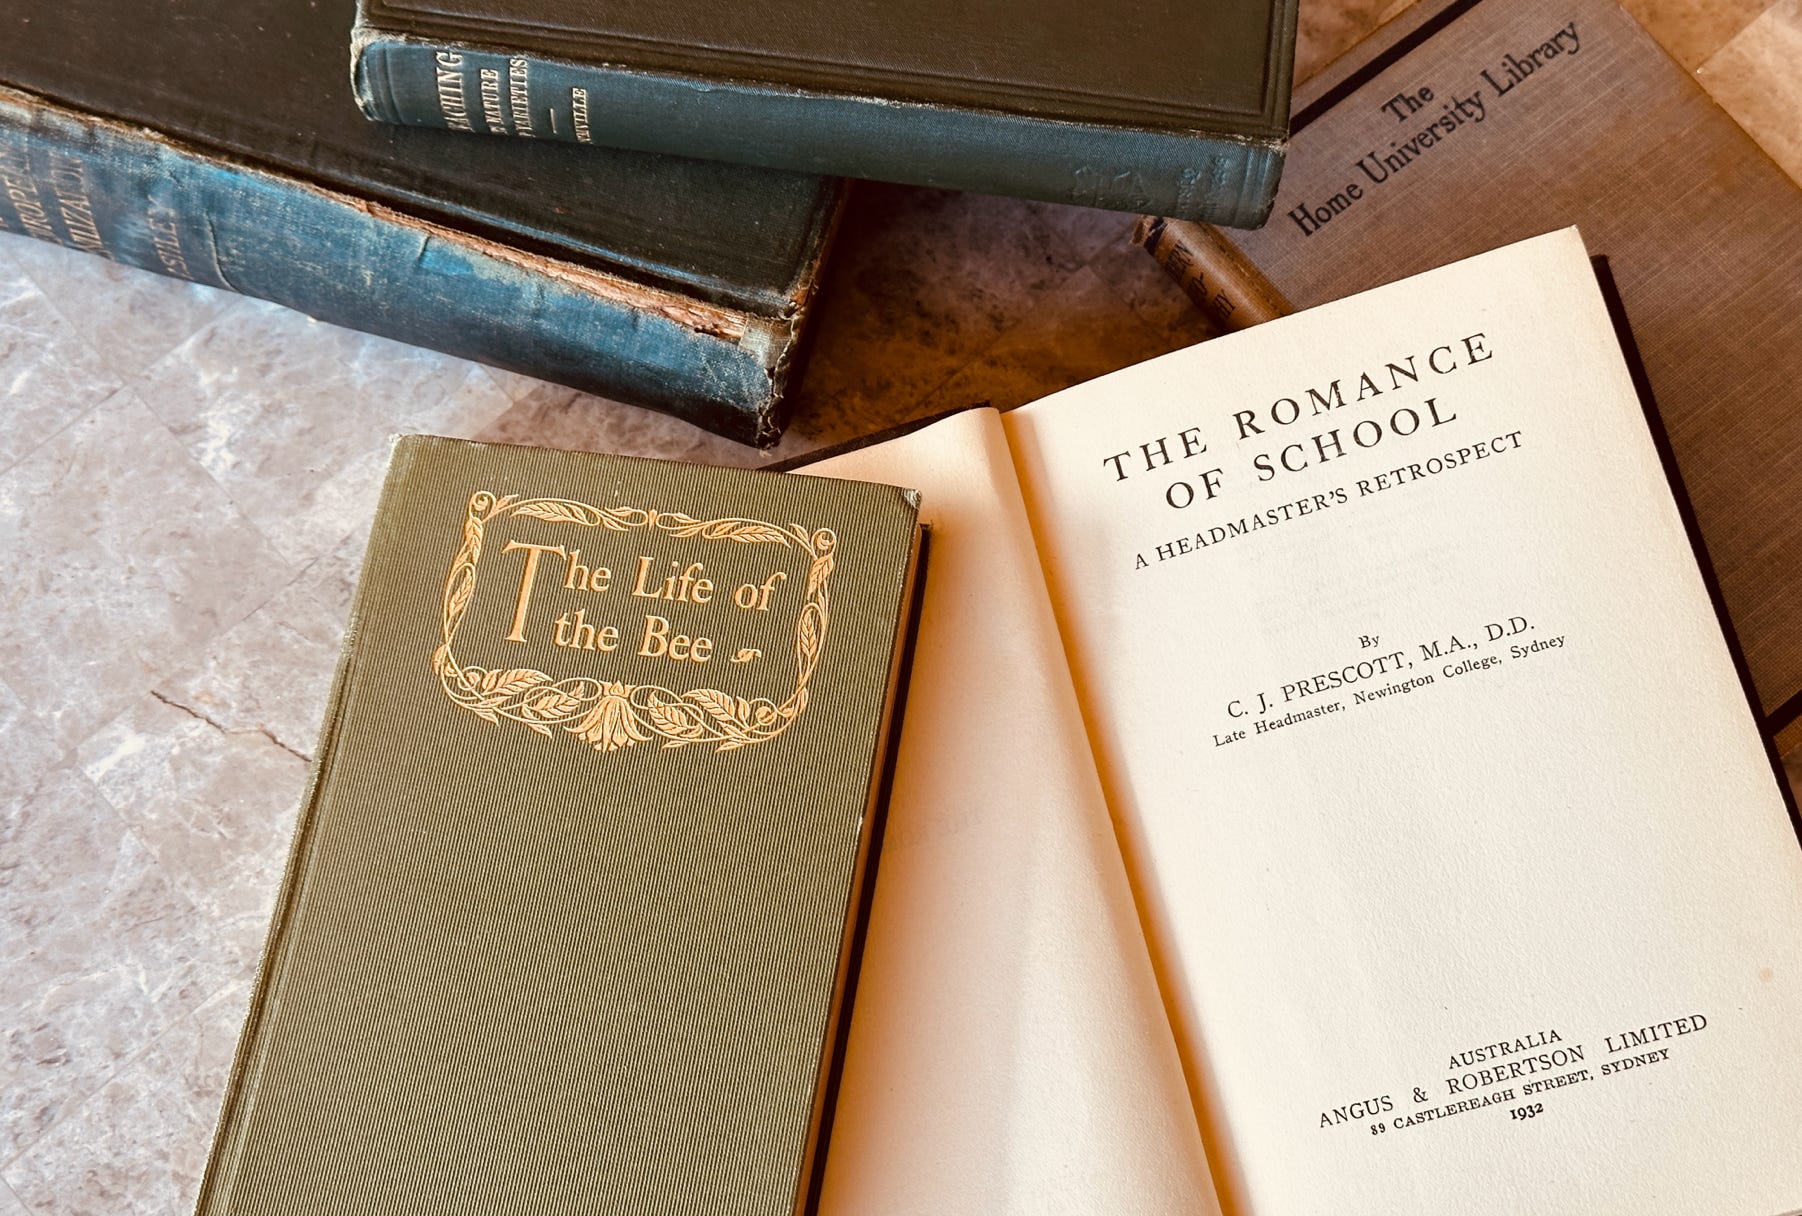 Several old books, including The Romance of School and The Life of the Bee.